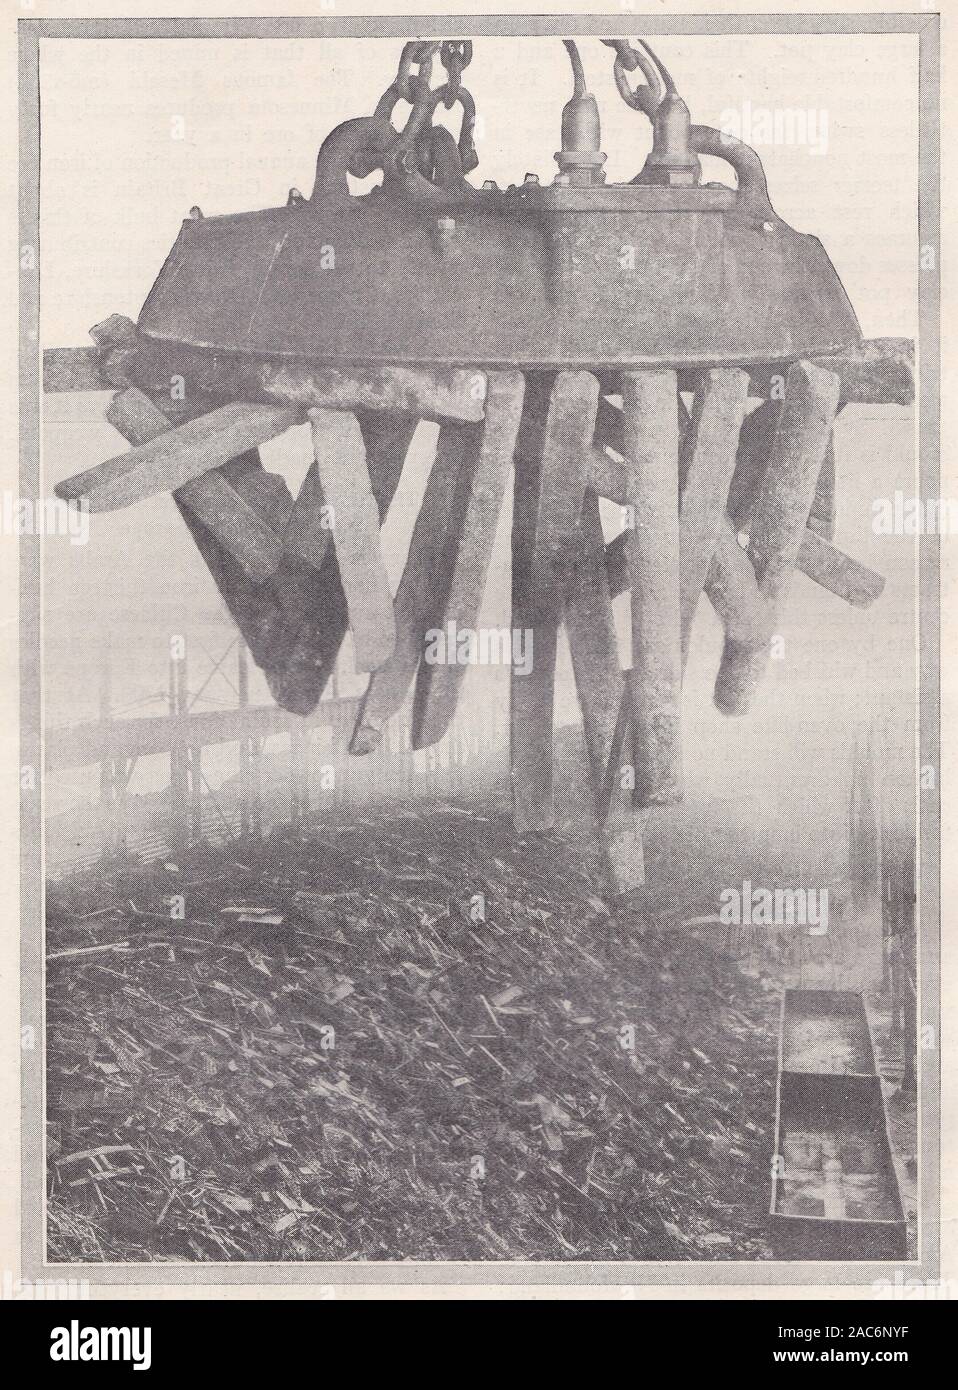 rytme Decode nedbrydes 1900s photo of a giant magnet using in steel foundry Stock Photo - Alamy